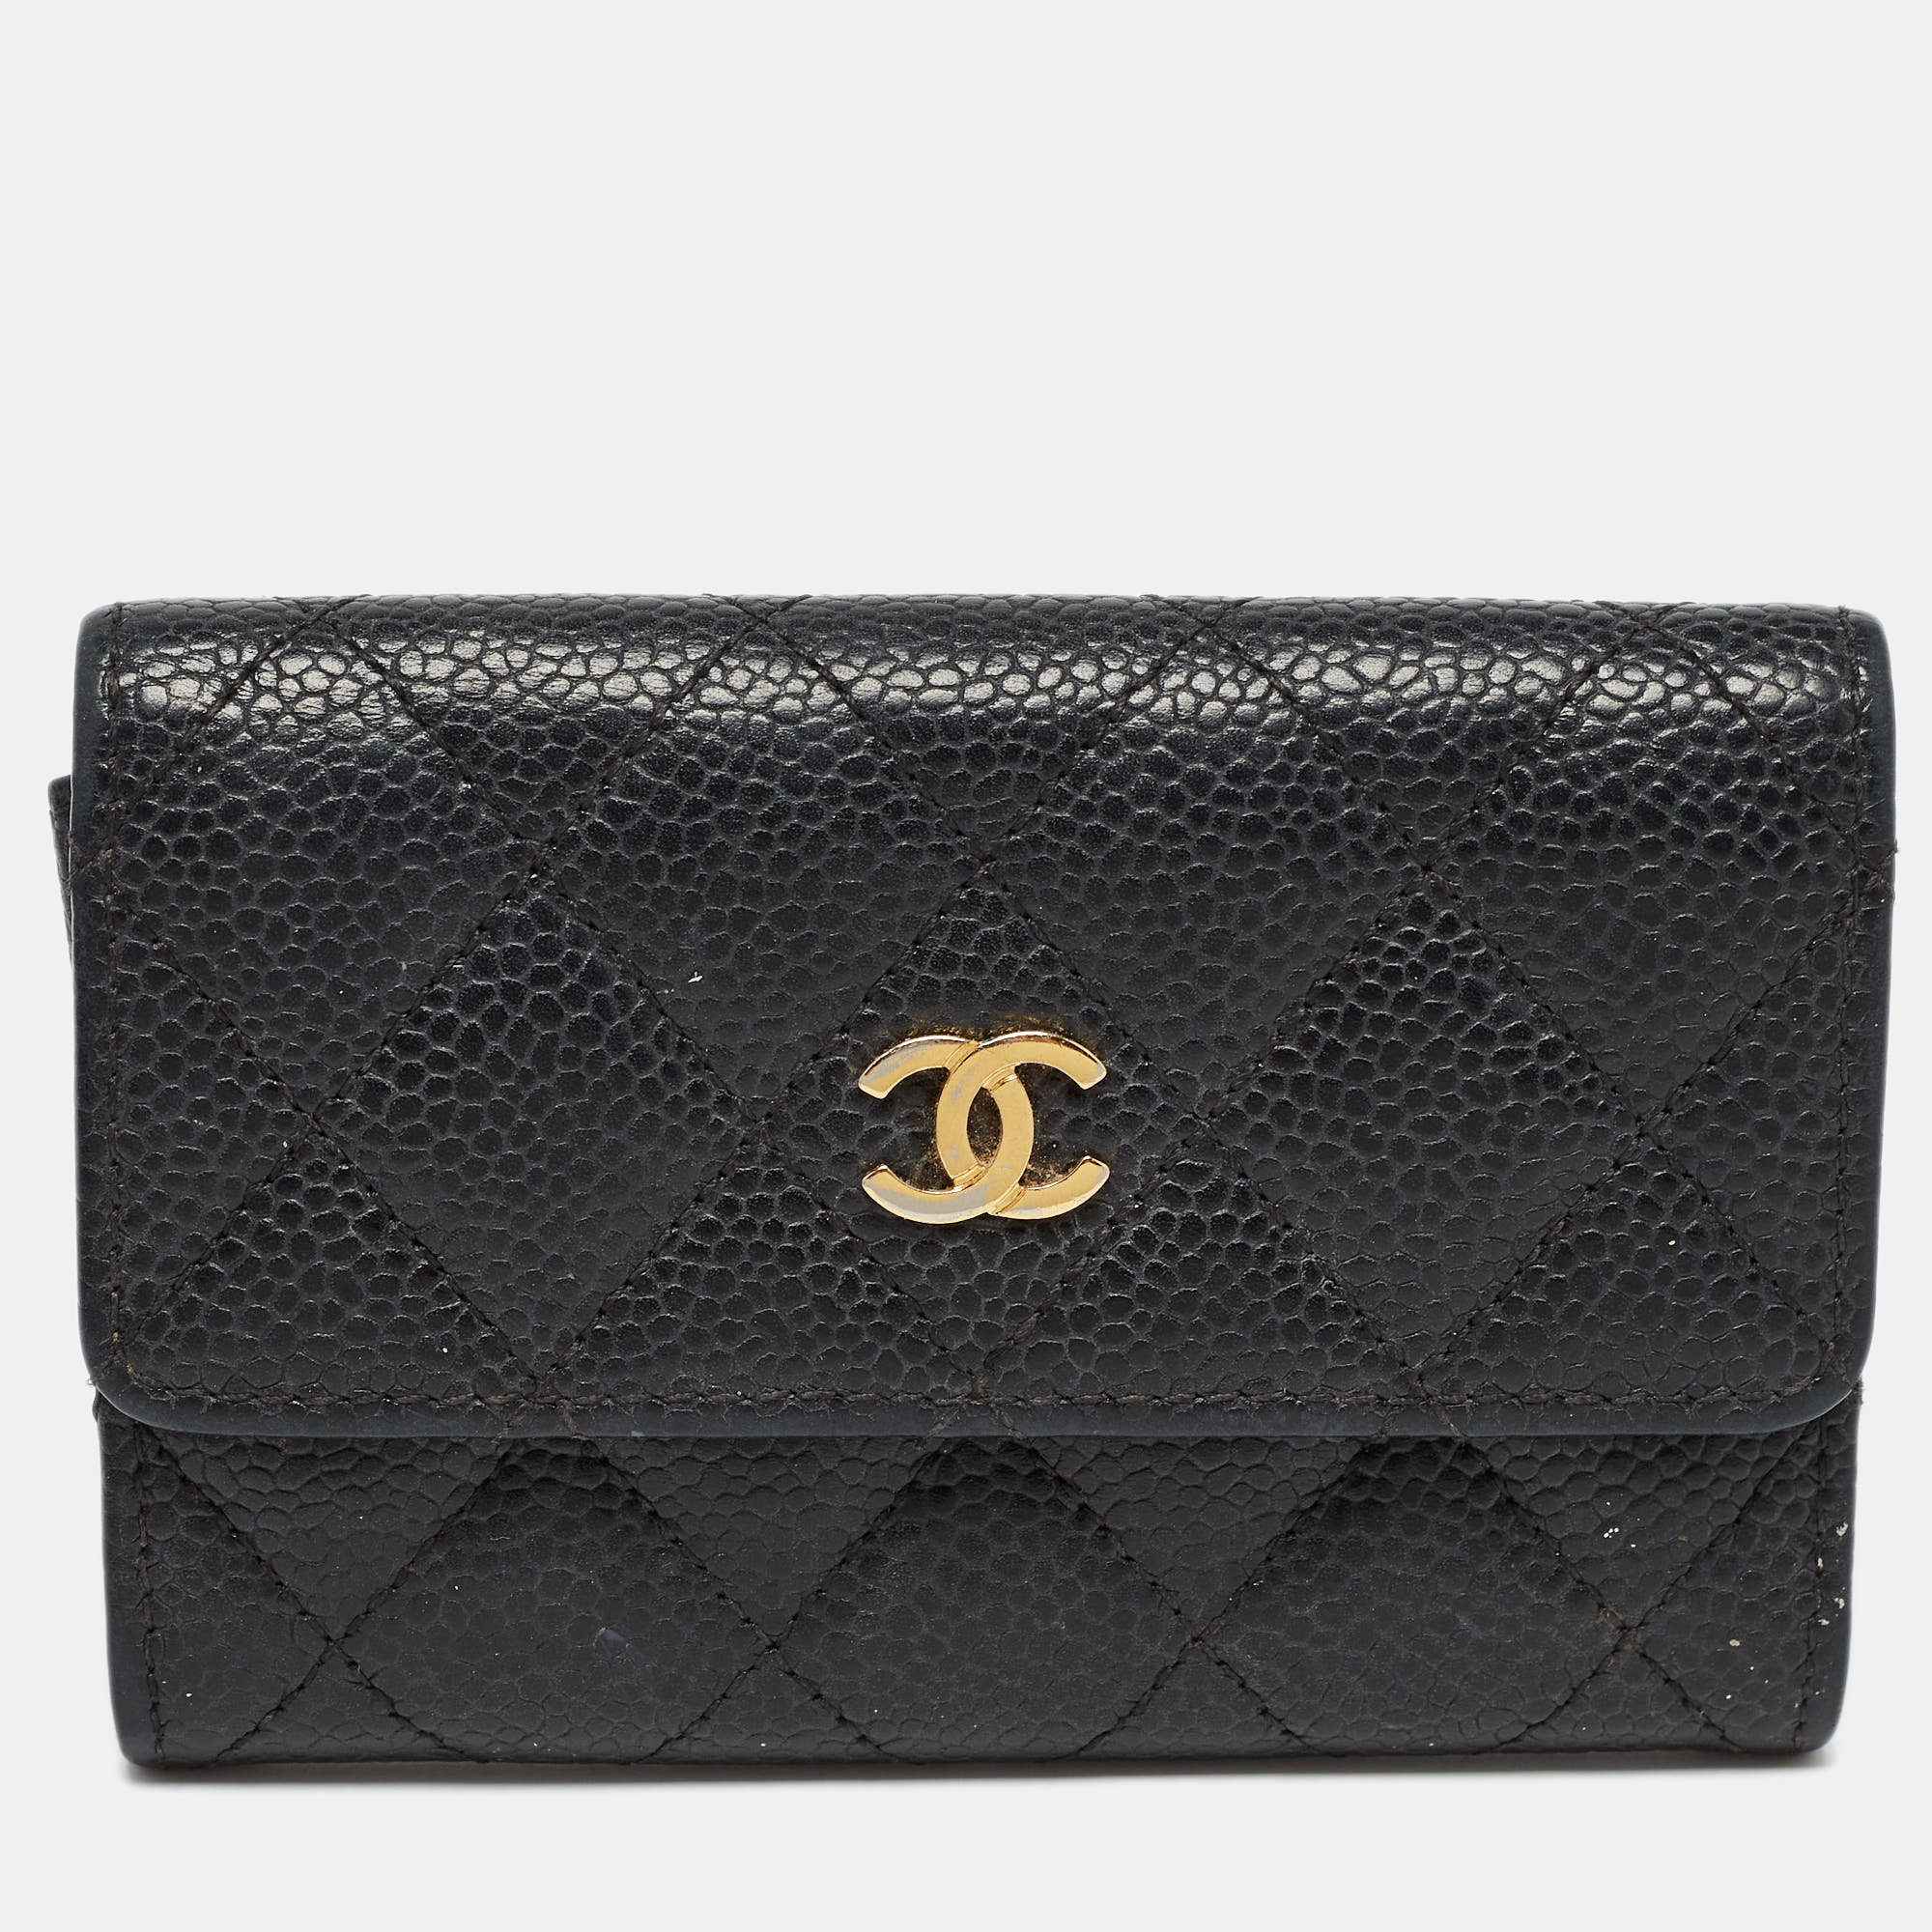 Pre-owned Chanel Black Caviar Quilted Leather Cc Flap Card Case